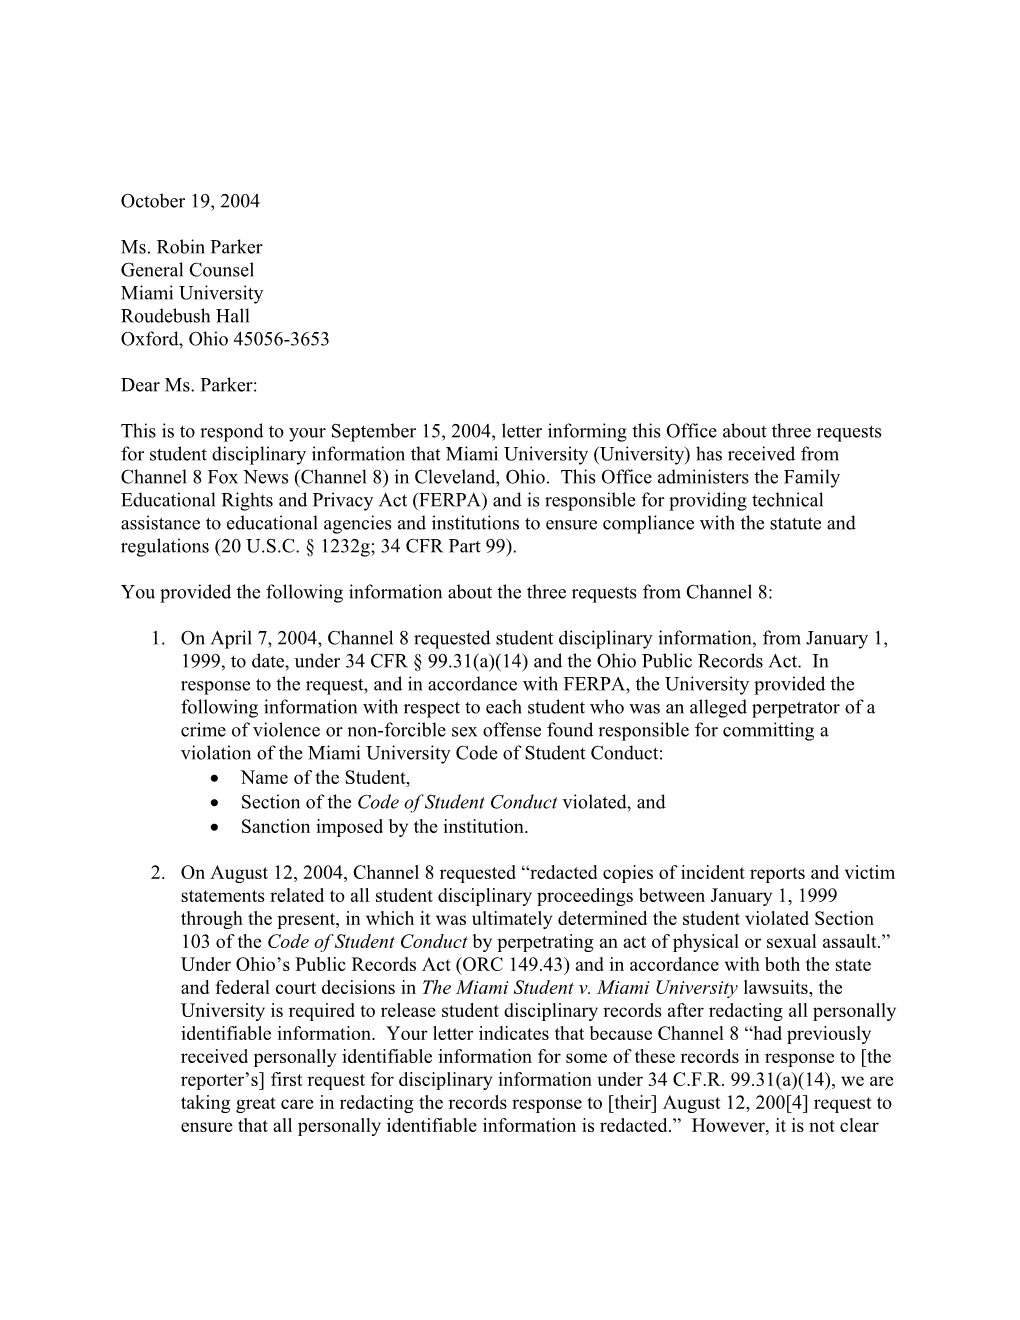 Letter to Miami University Re: Disclosure of Information Making Student's Identity Easily